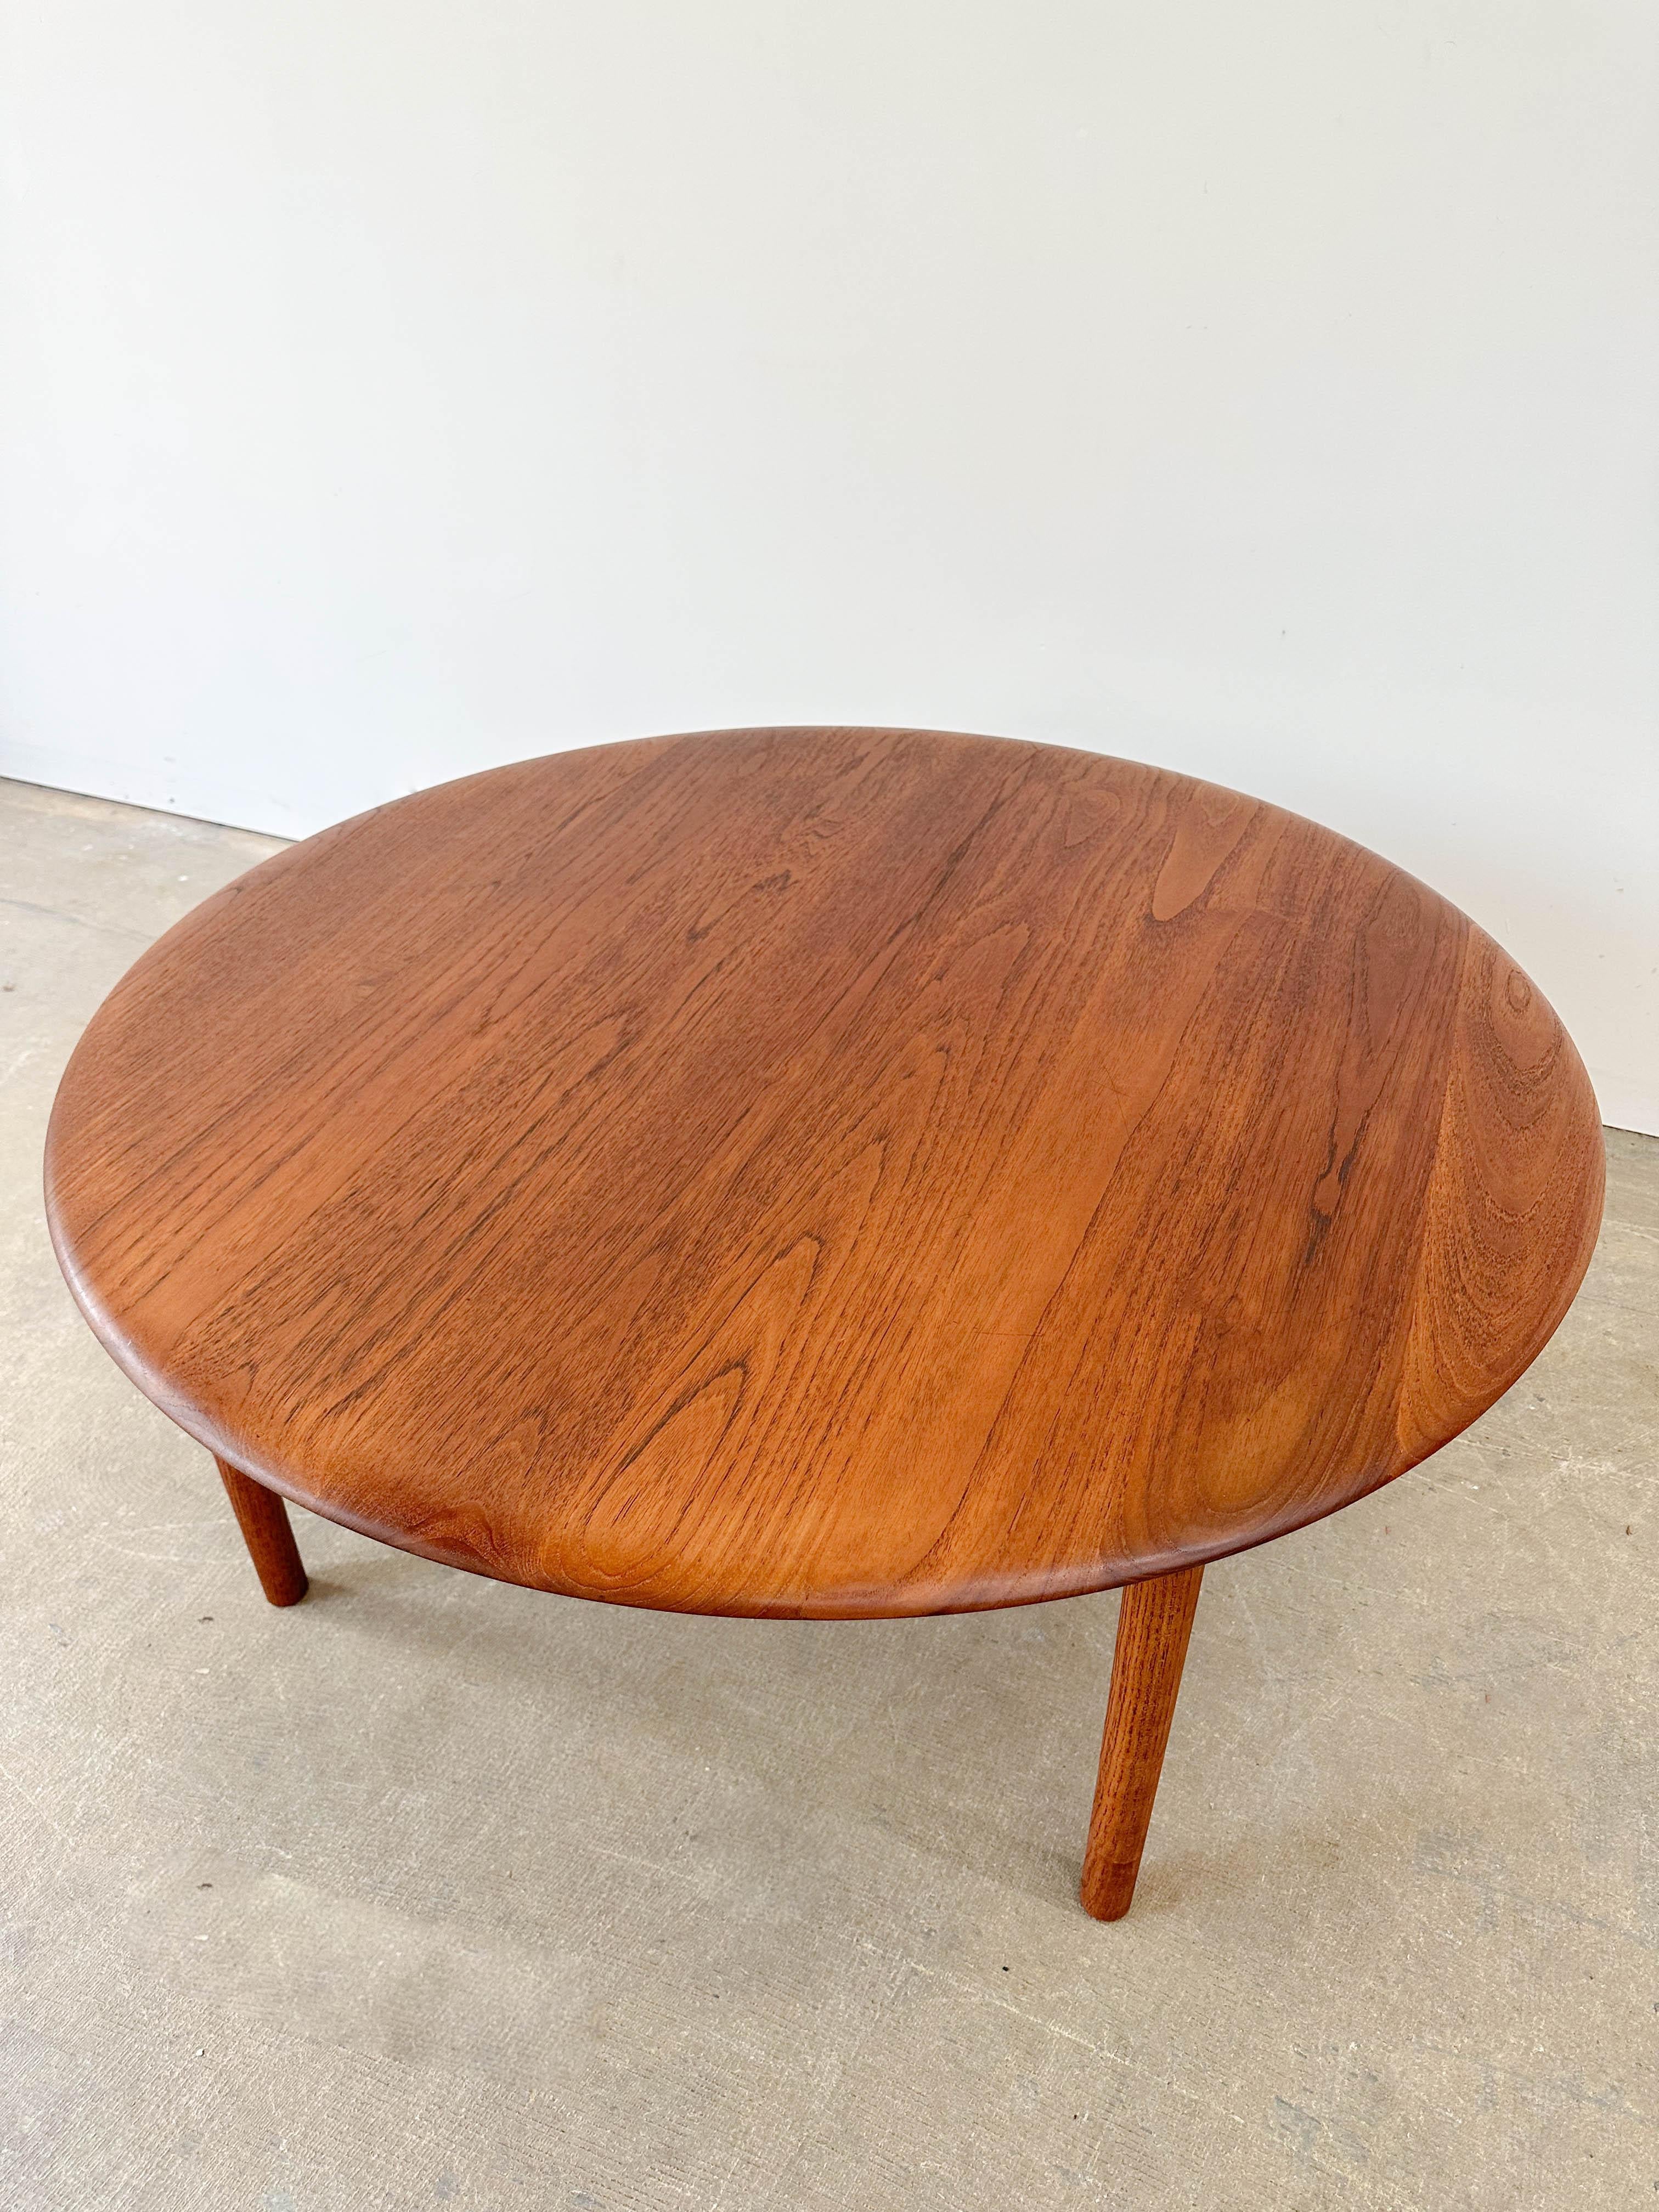 Danish modern coffee table designed by Peter Hvidt and Orla Molgaard-Nielsen for France and Son in the 1950s. Rare solid teak top is absolutely gorgeous with a rich range of teak hues and a wonderful rounded edge. Table is in very good condition.